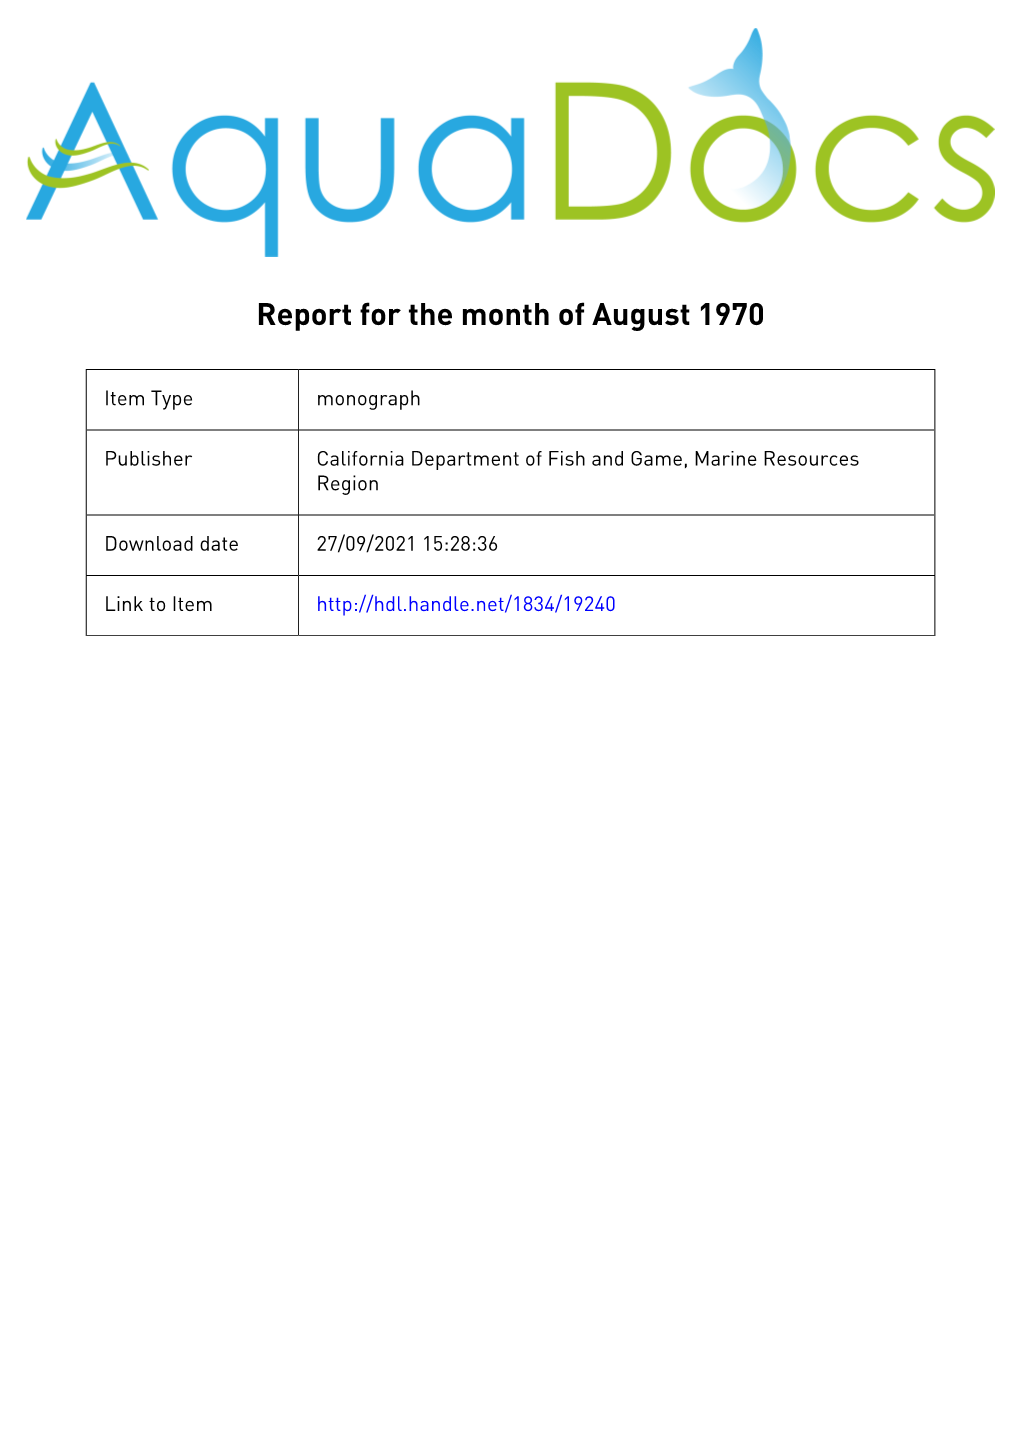 Report for the Month of August 1970